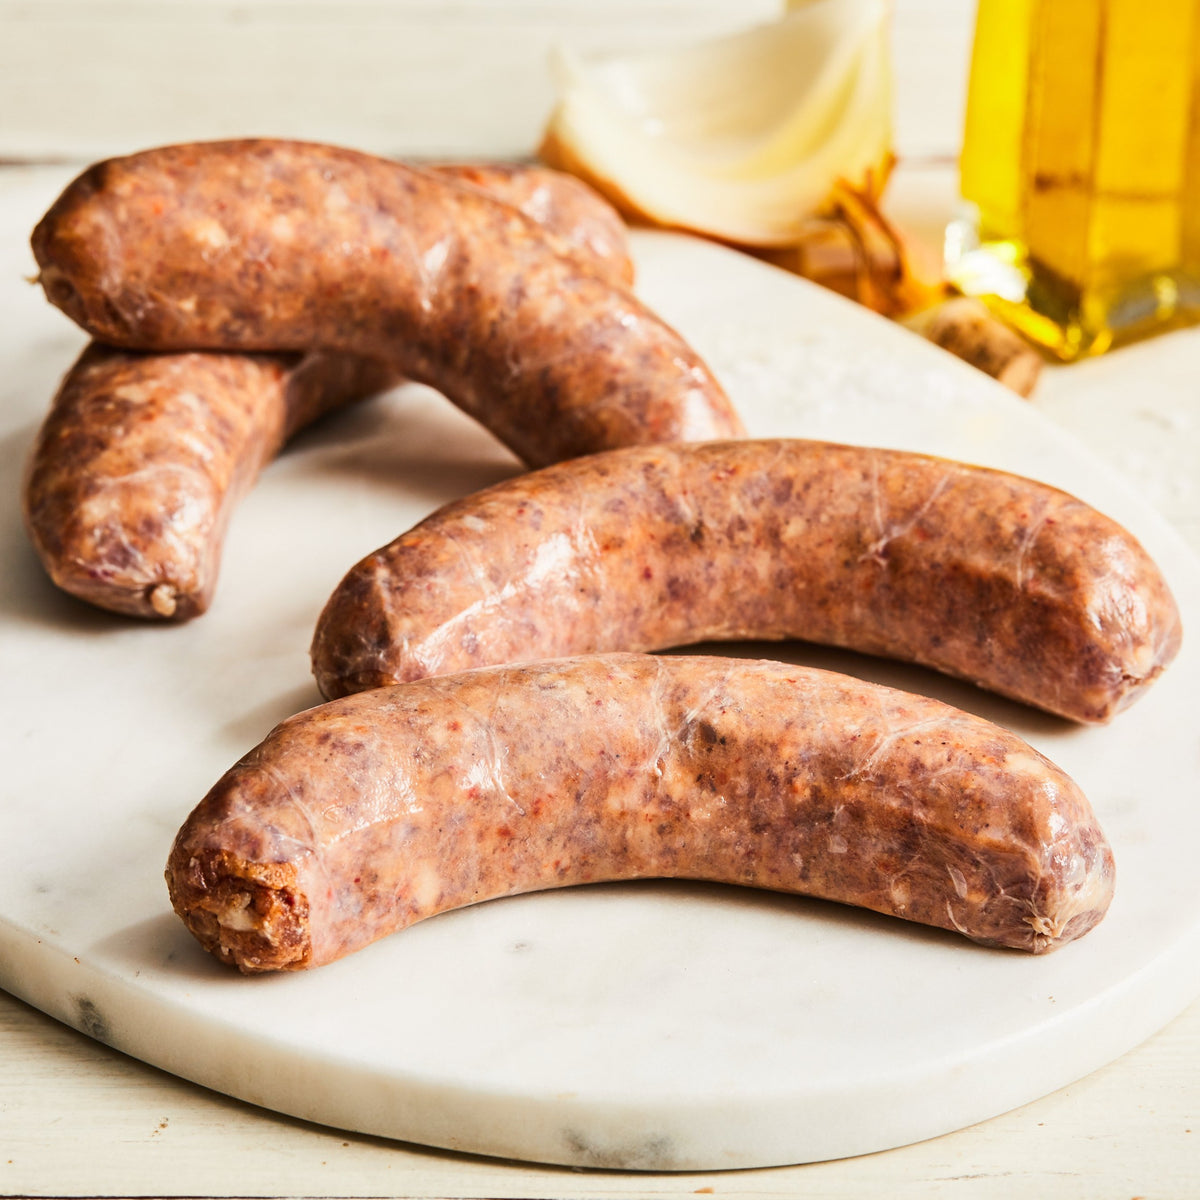 Image of Sweet Italian sausage. 4 links, about 1 lb. an uncooked Italian-style pork sausage made with toasted fennel seed, coriander, black pepper, garlic, red onion jam, and pancetta